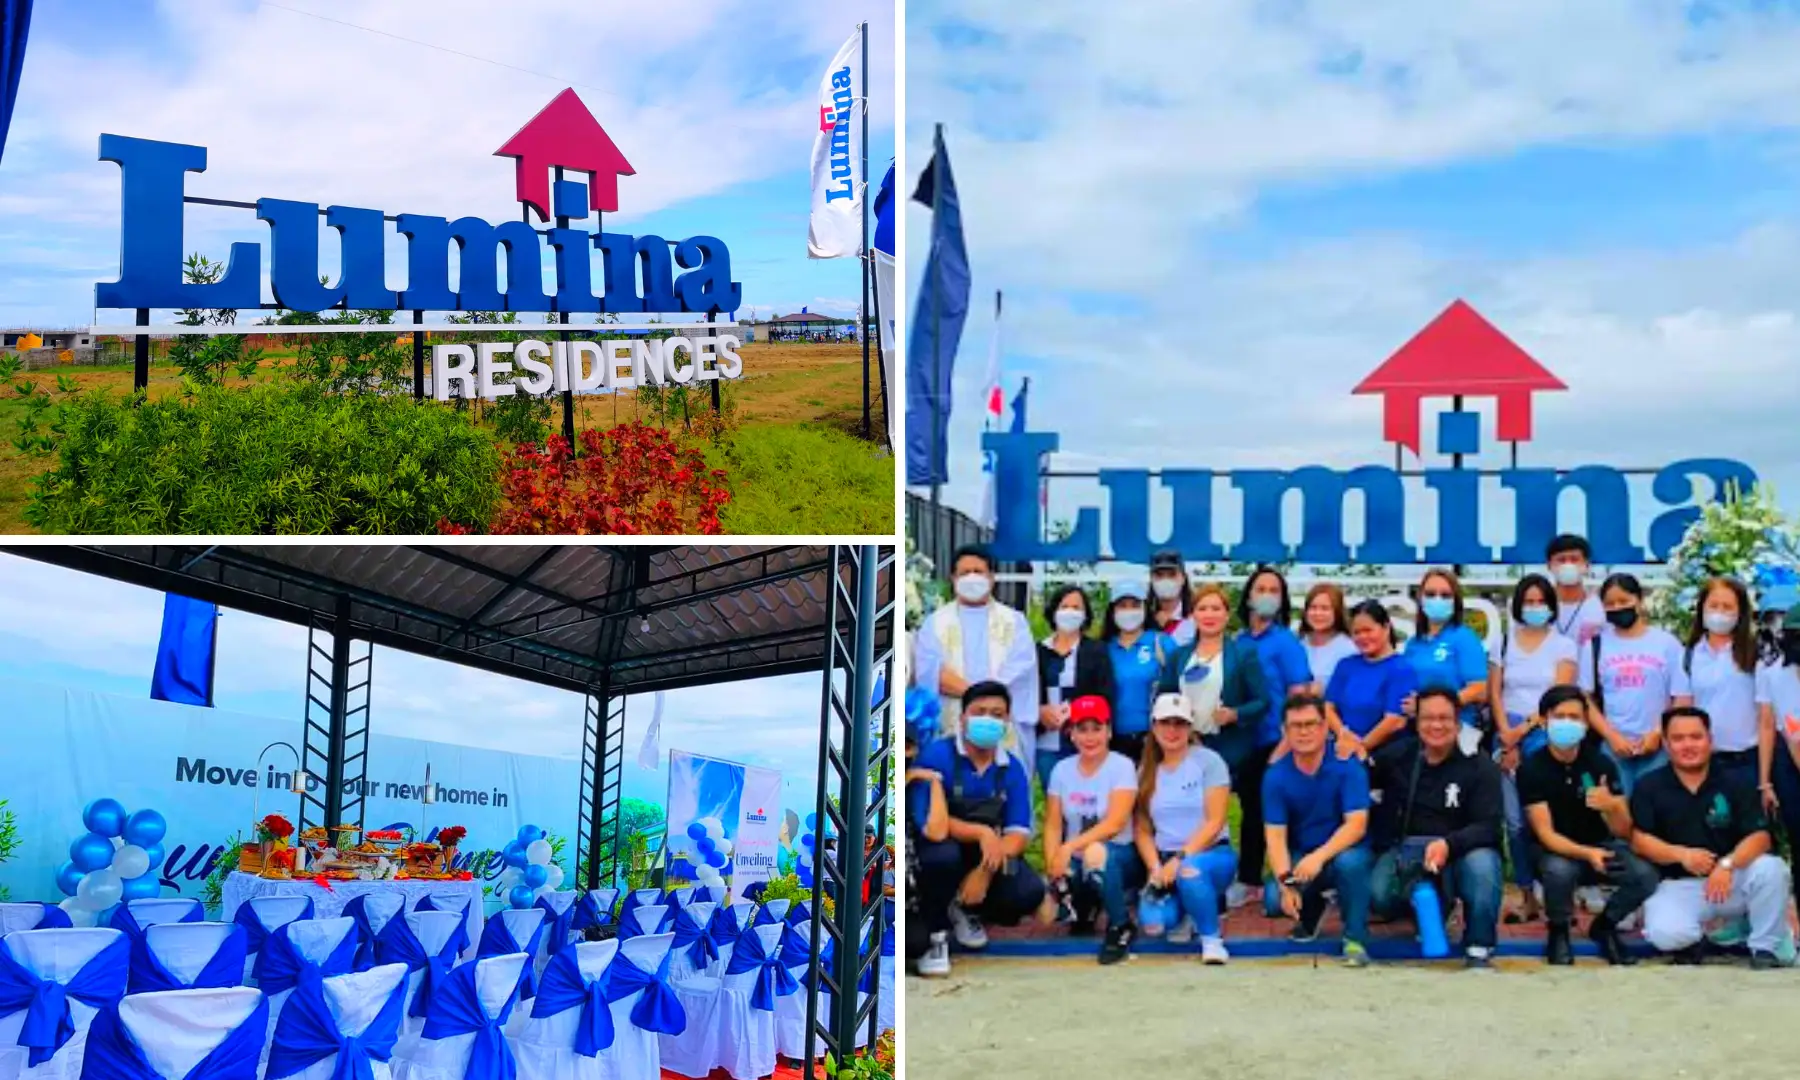 Lumina Residences Bulacan Activity Area and Subdivision Marker Already Launched